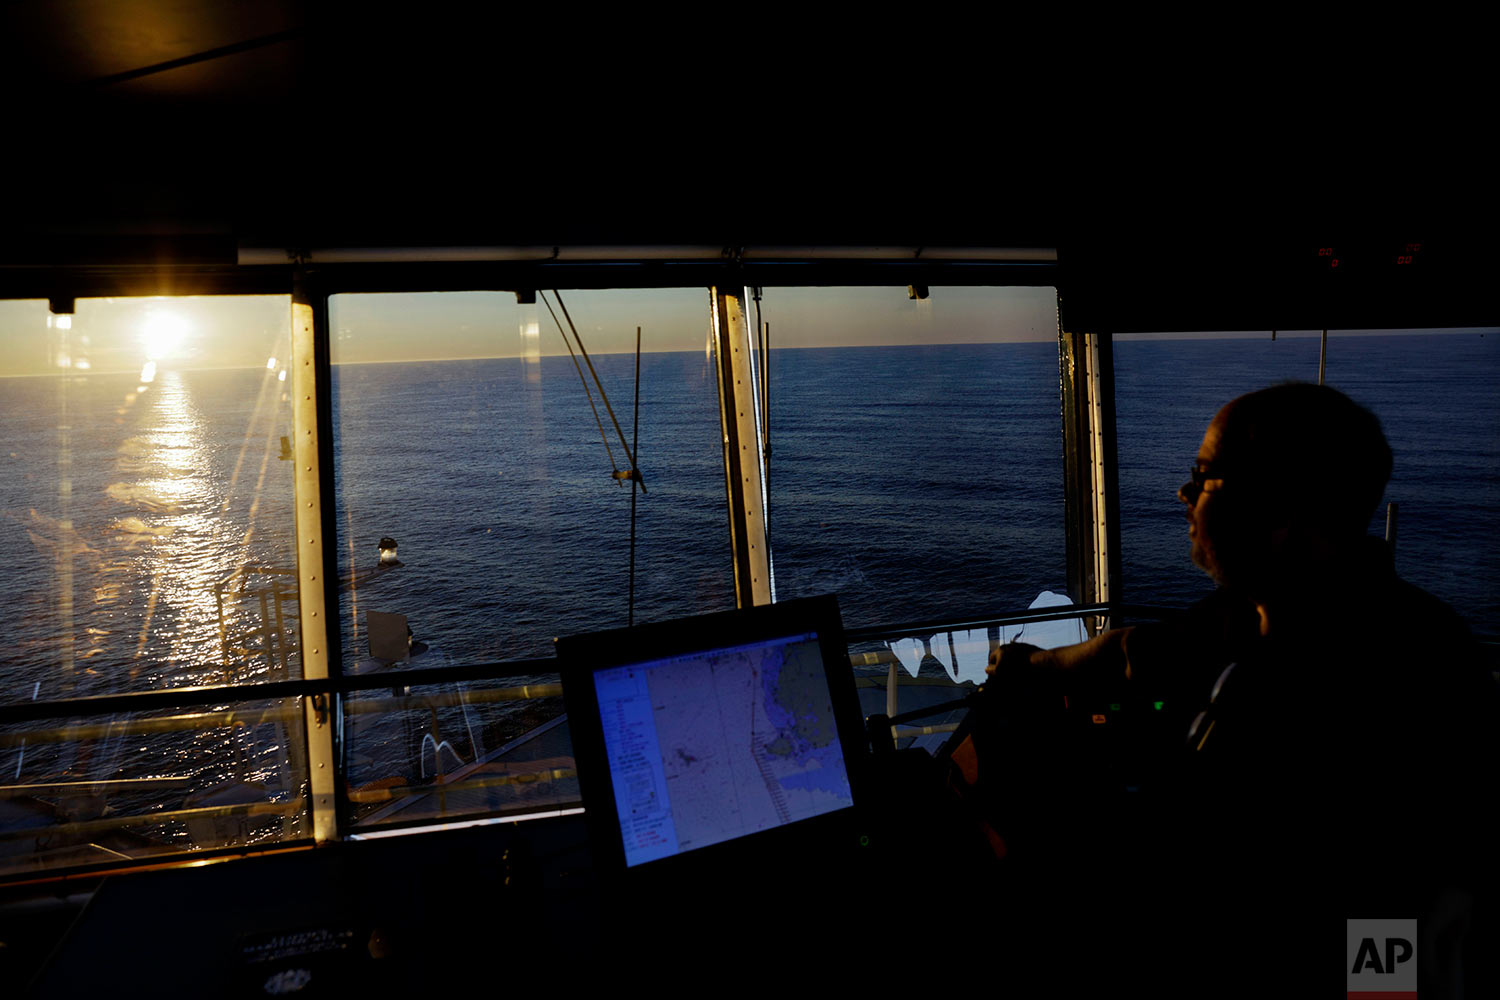  The sun lingers above the Bering Sea at midnight as second officer Juha Tuomi overseas the navigation of the Finnish icebreaker MSV Nordica as it sails toward the Canadian Arctic Archipelago to traverse the Northwest Passage, early Thursday, July 13